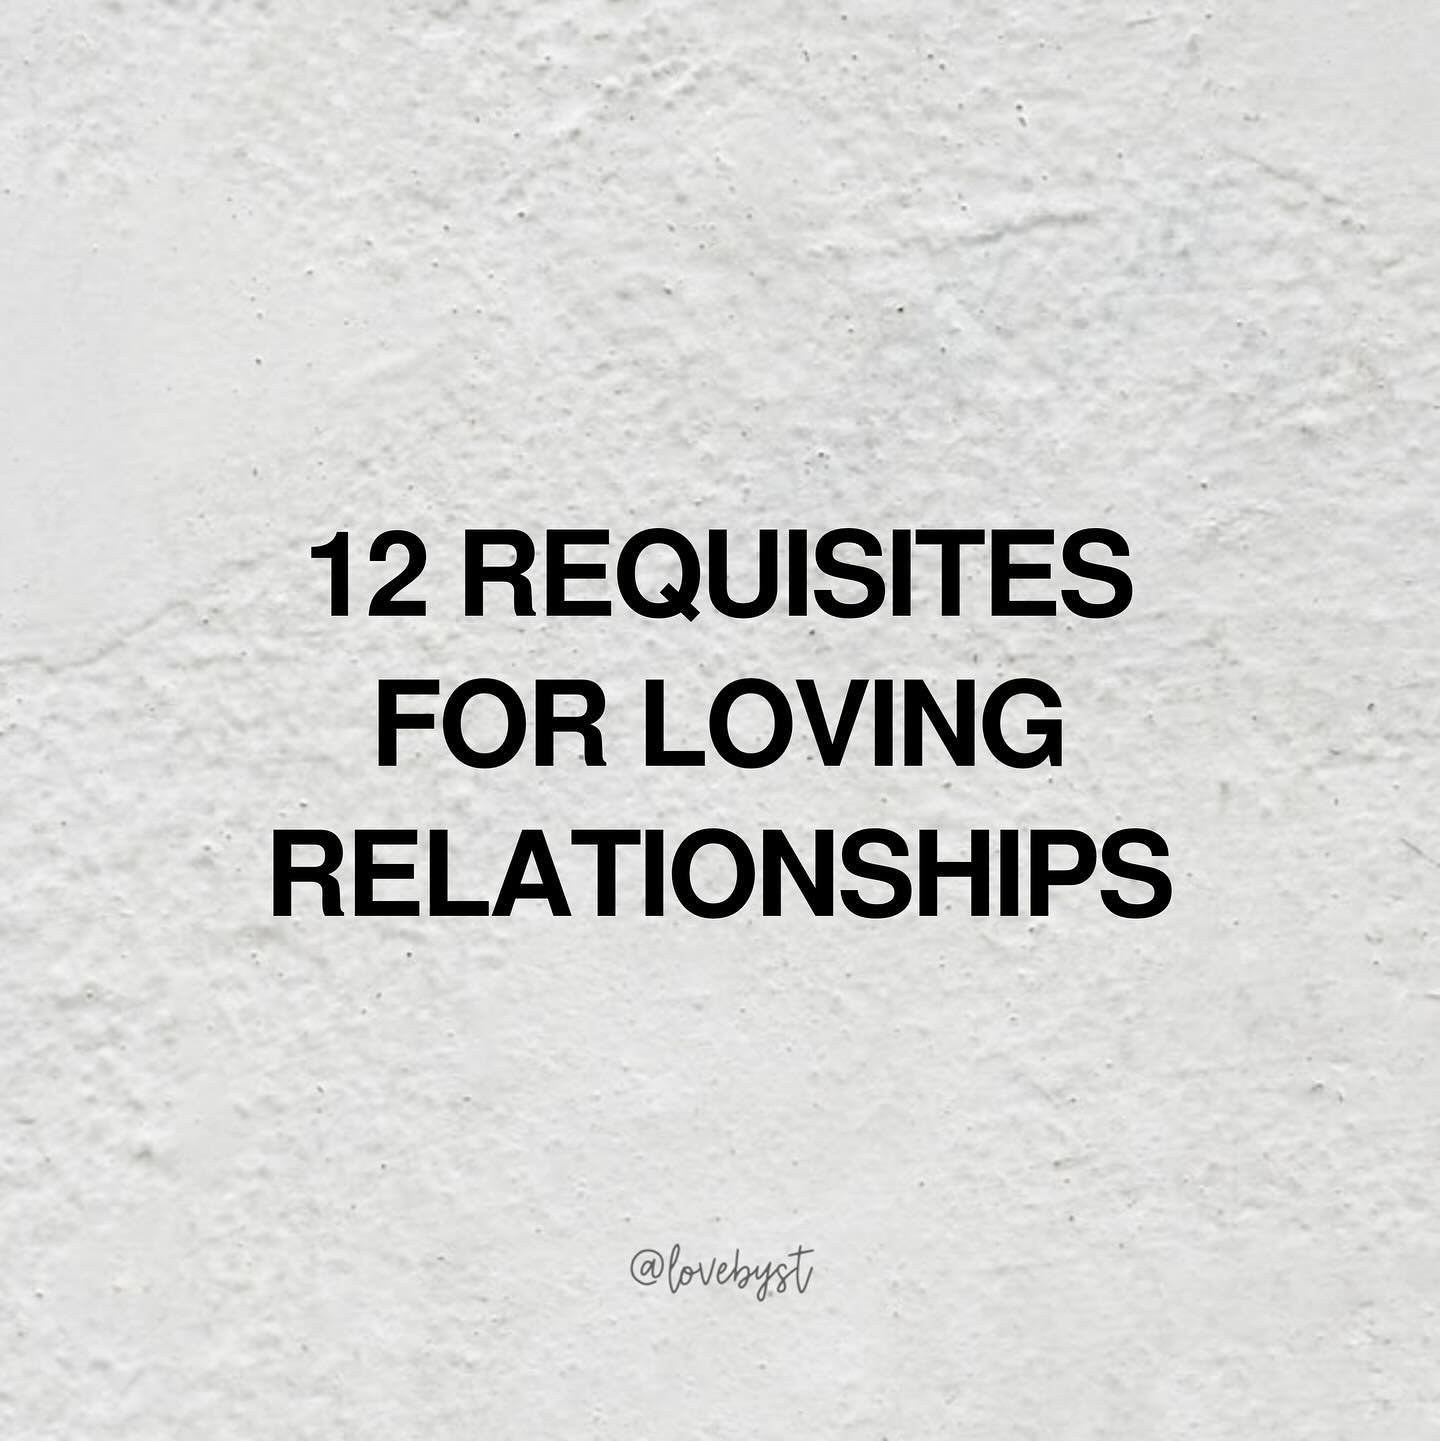 Friends &mdash; a quick drive by to share 3 things:

1) This new blog post ^ (Incidentally, these requisites are not exclusive to romantic relationships, and at the same time can be especially helpful for romantic relationships.) 

2) I&rsquo;ve open